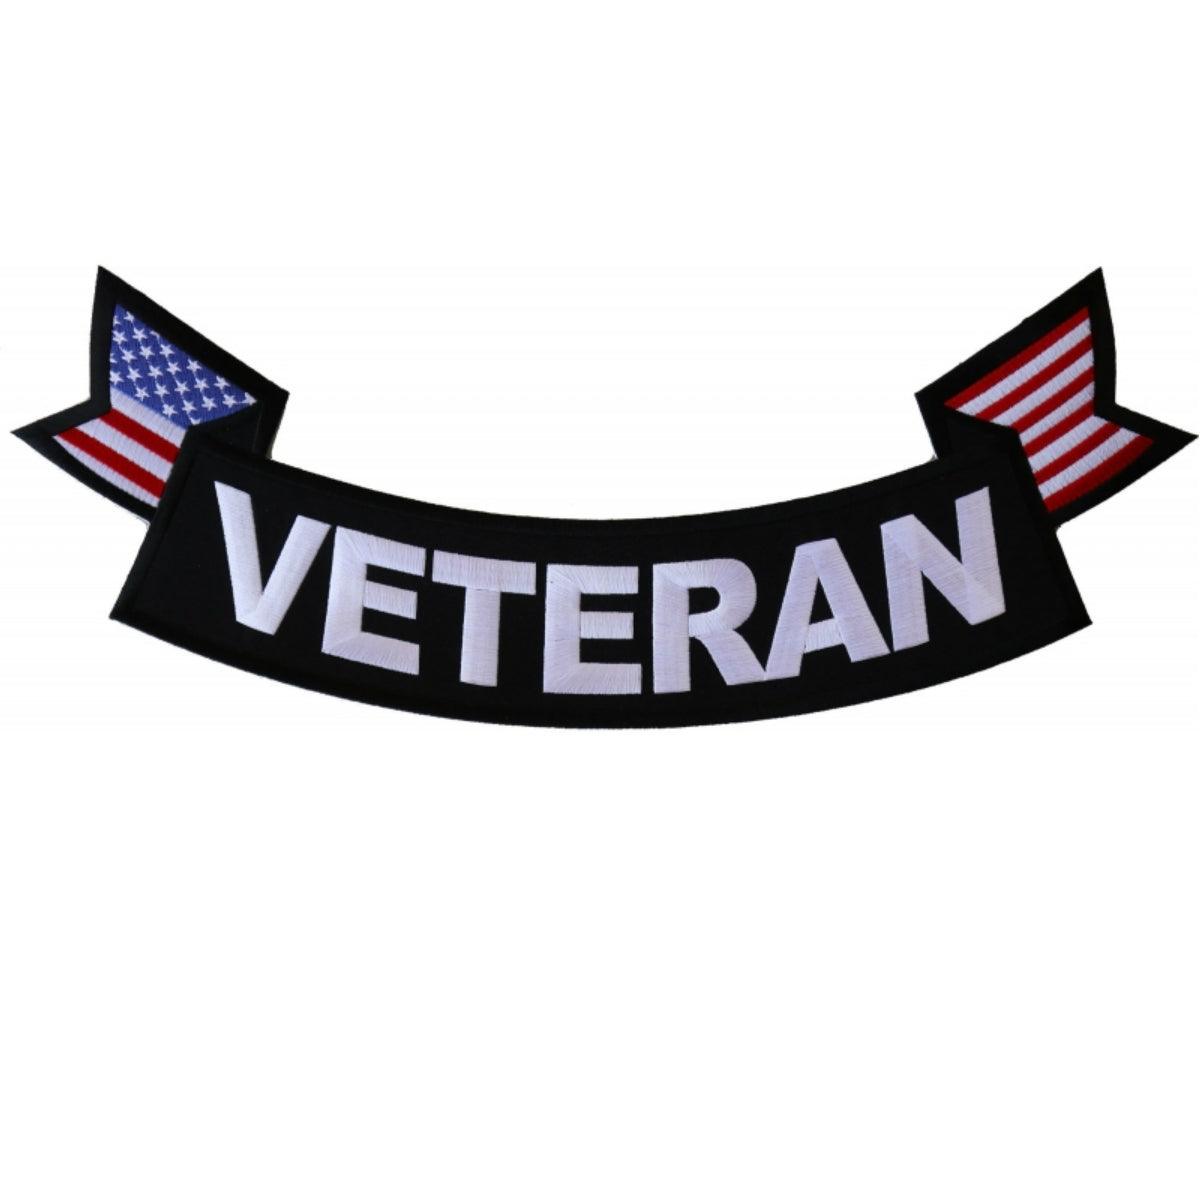 Daniel Smart Veteran Rocker With Flags Embroidered Iron On Patch, 15 x 6 inches - American Legend Rider